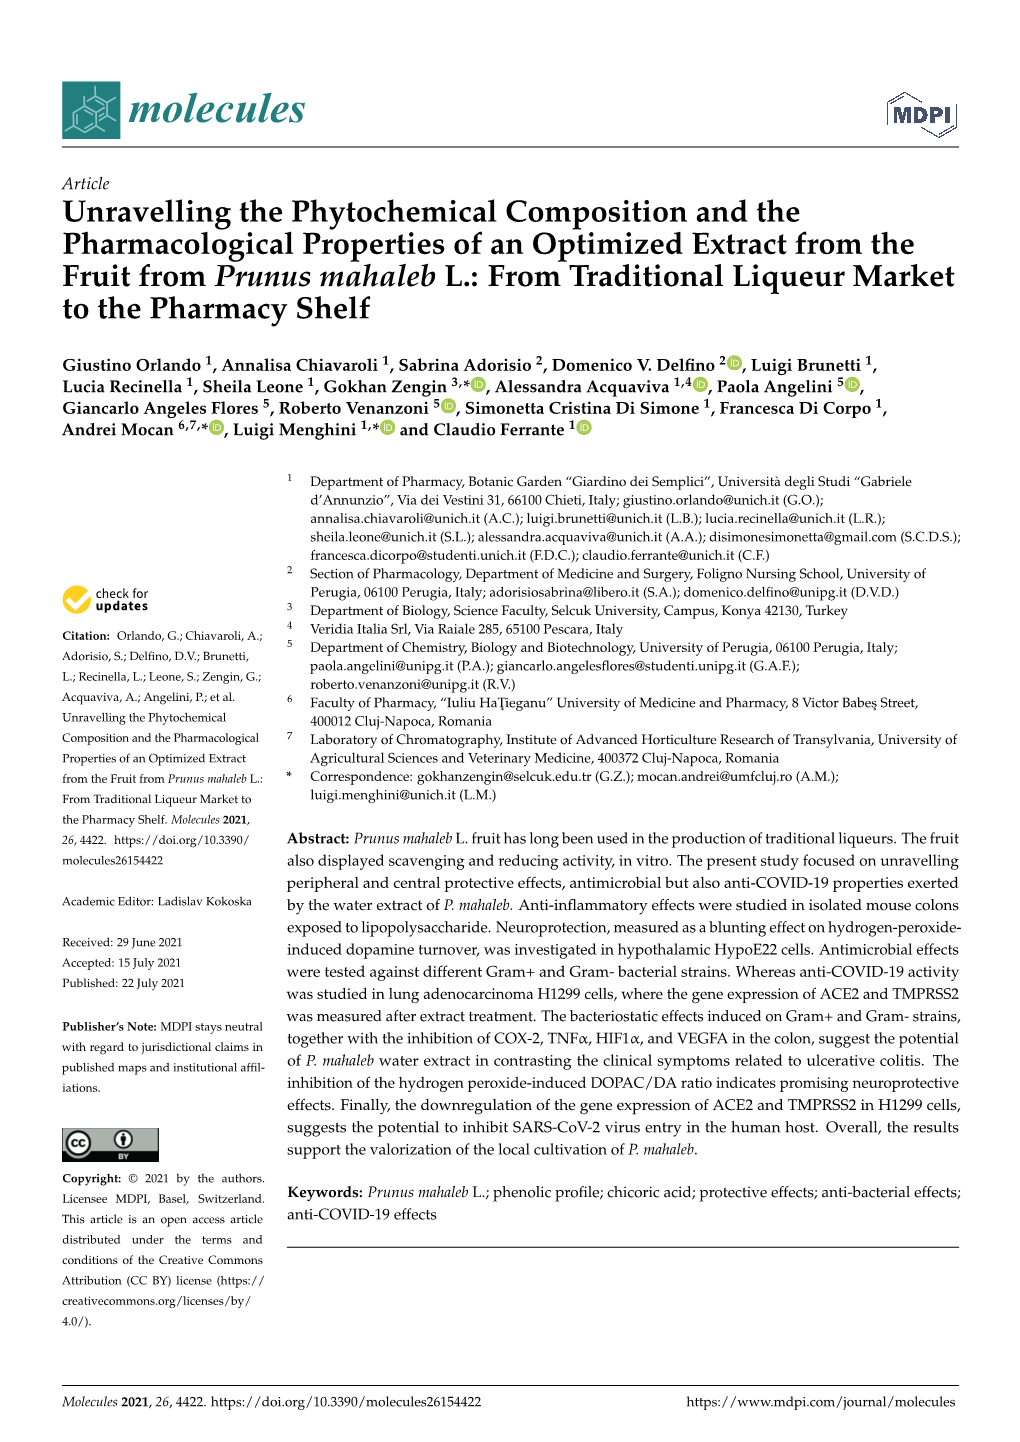 Unravelling the Phytochemical Composition and the Pharmacological Properties of an Optimized Extract from the Fruit from Prunus